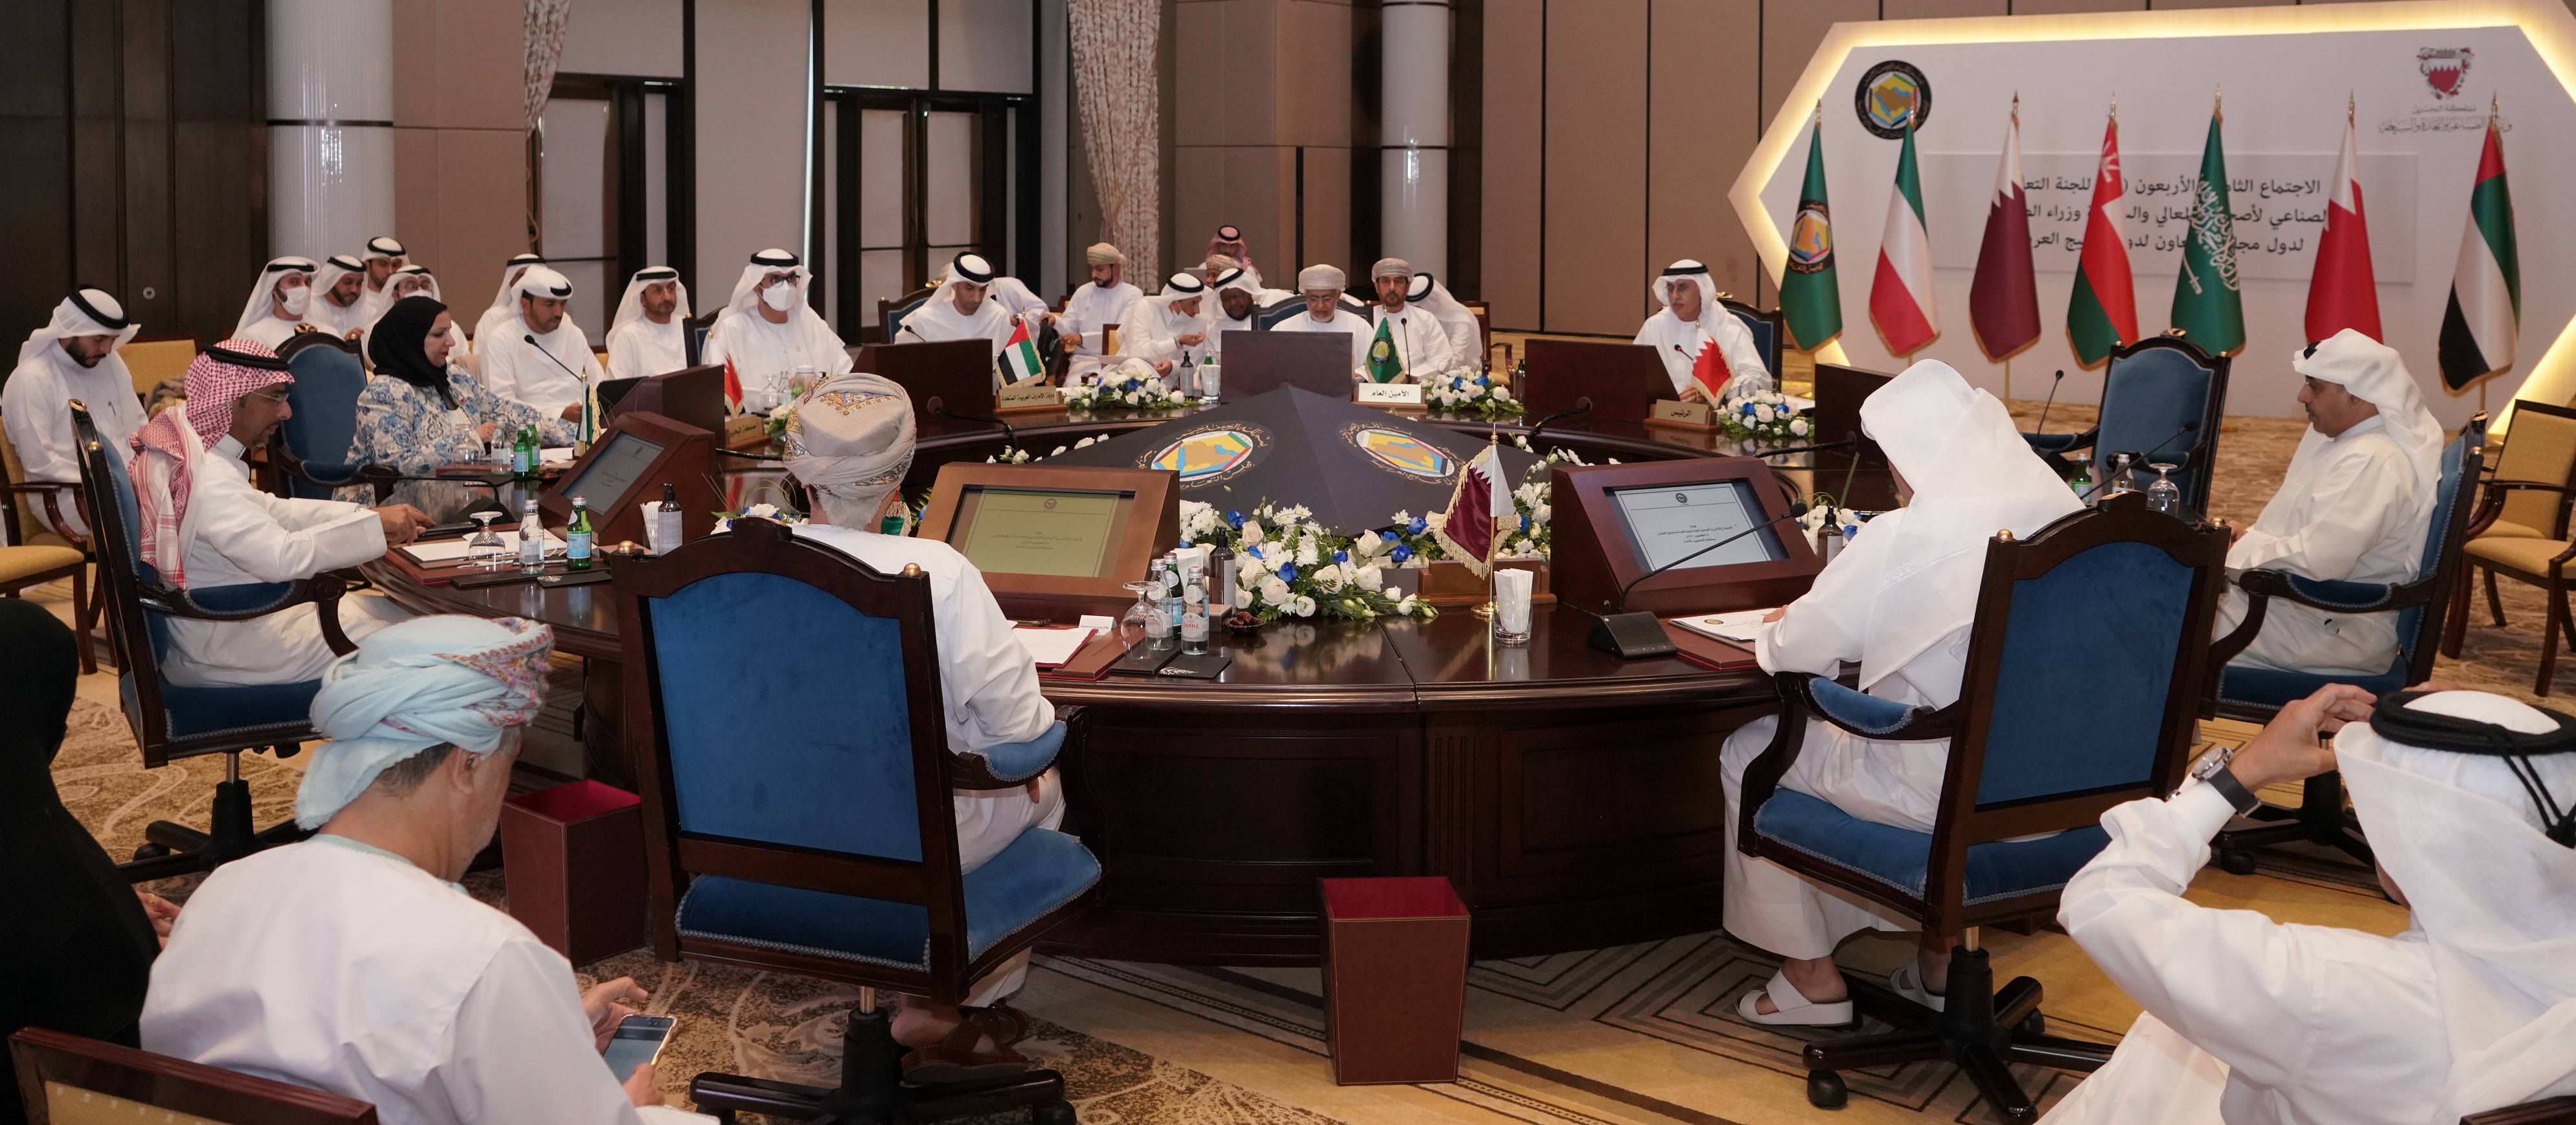 Sultan Al Jaber emphasizes the importance of GCC cooperation to enhance the performance of the region’s industrial sector